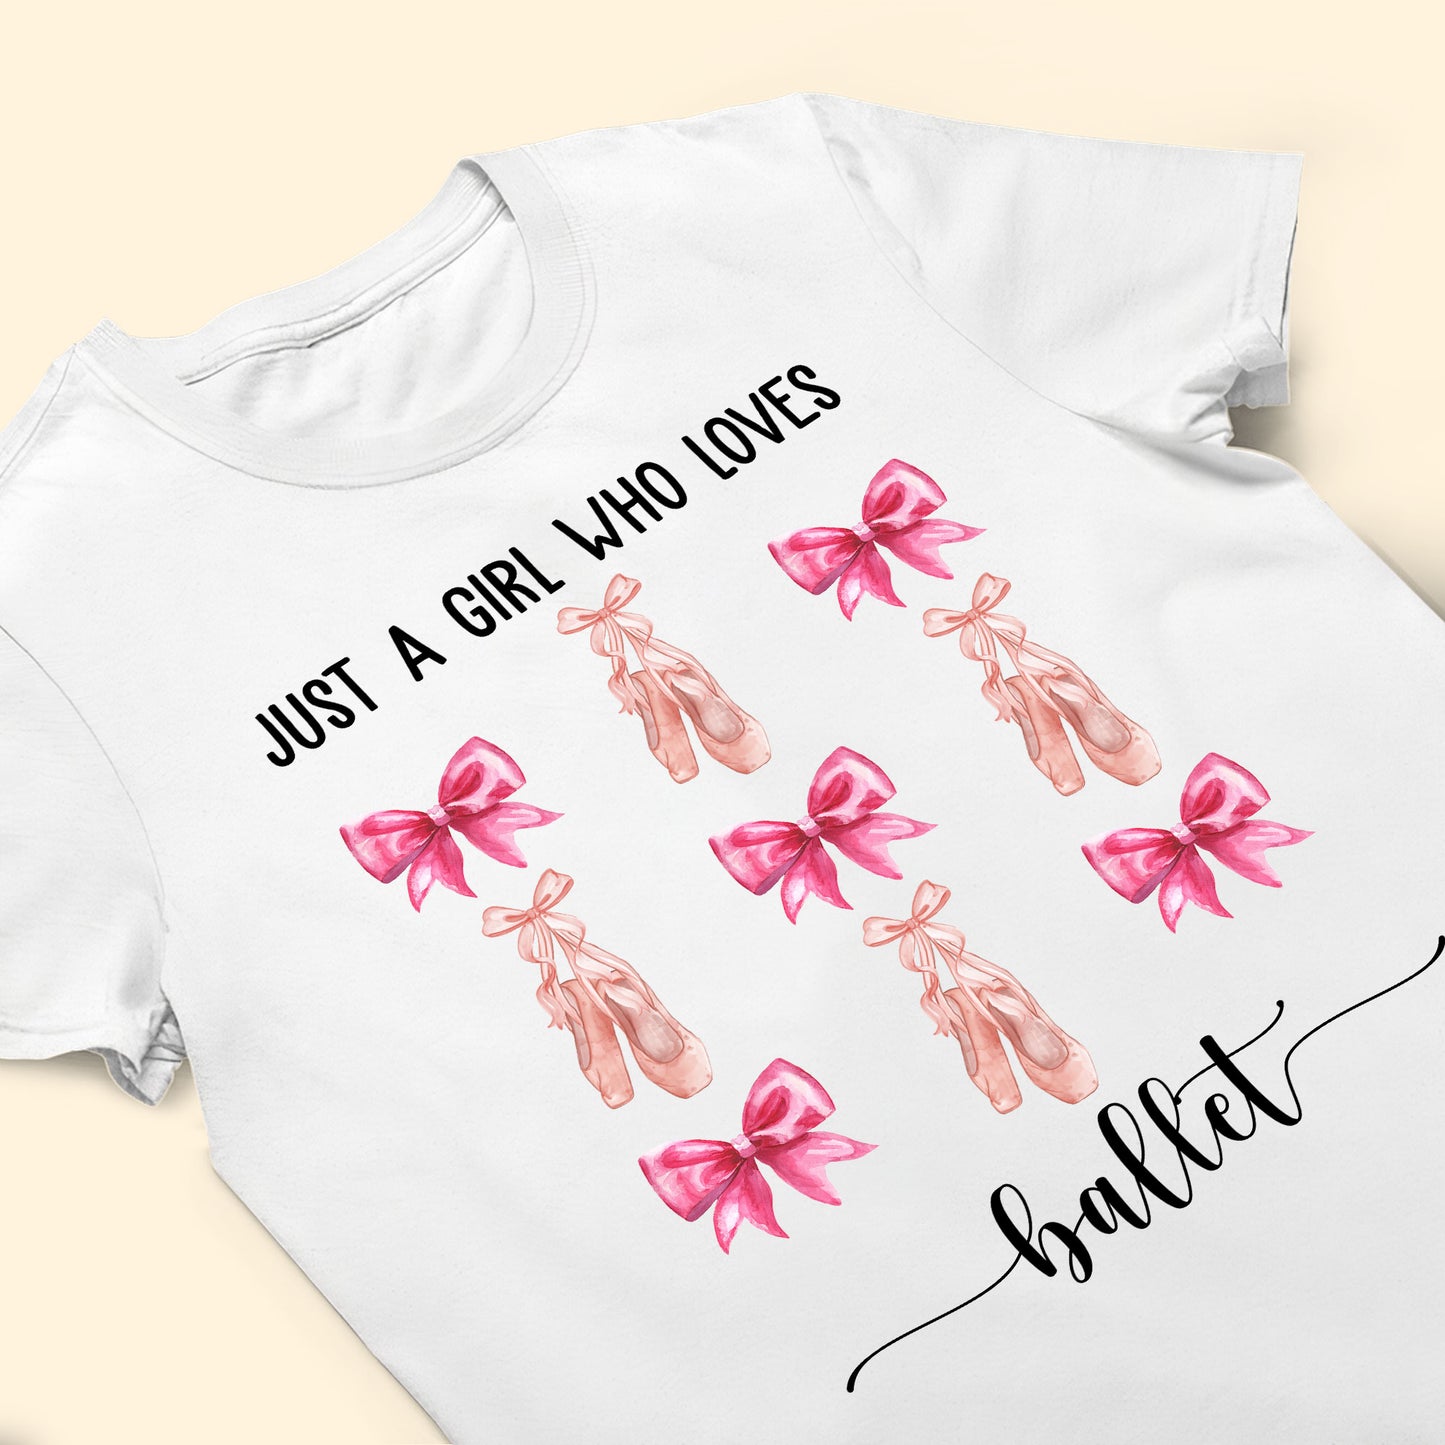 Coquette Pink Bow Trendy Just A Girl Who Loves Ballet, Baseball - Personalized Shirt